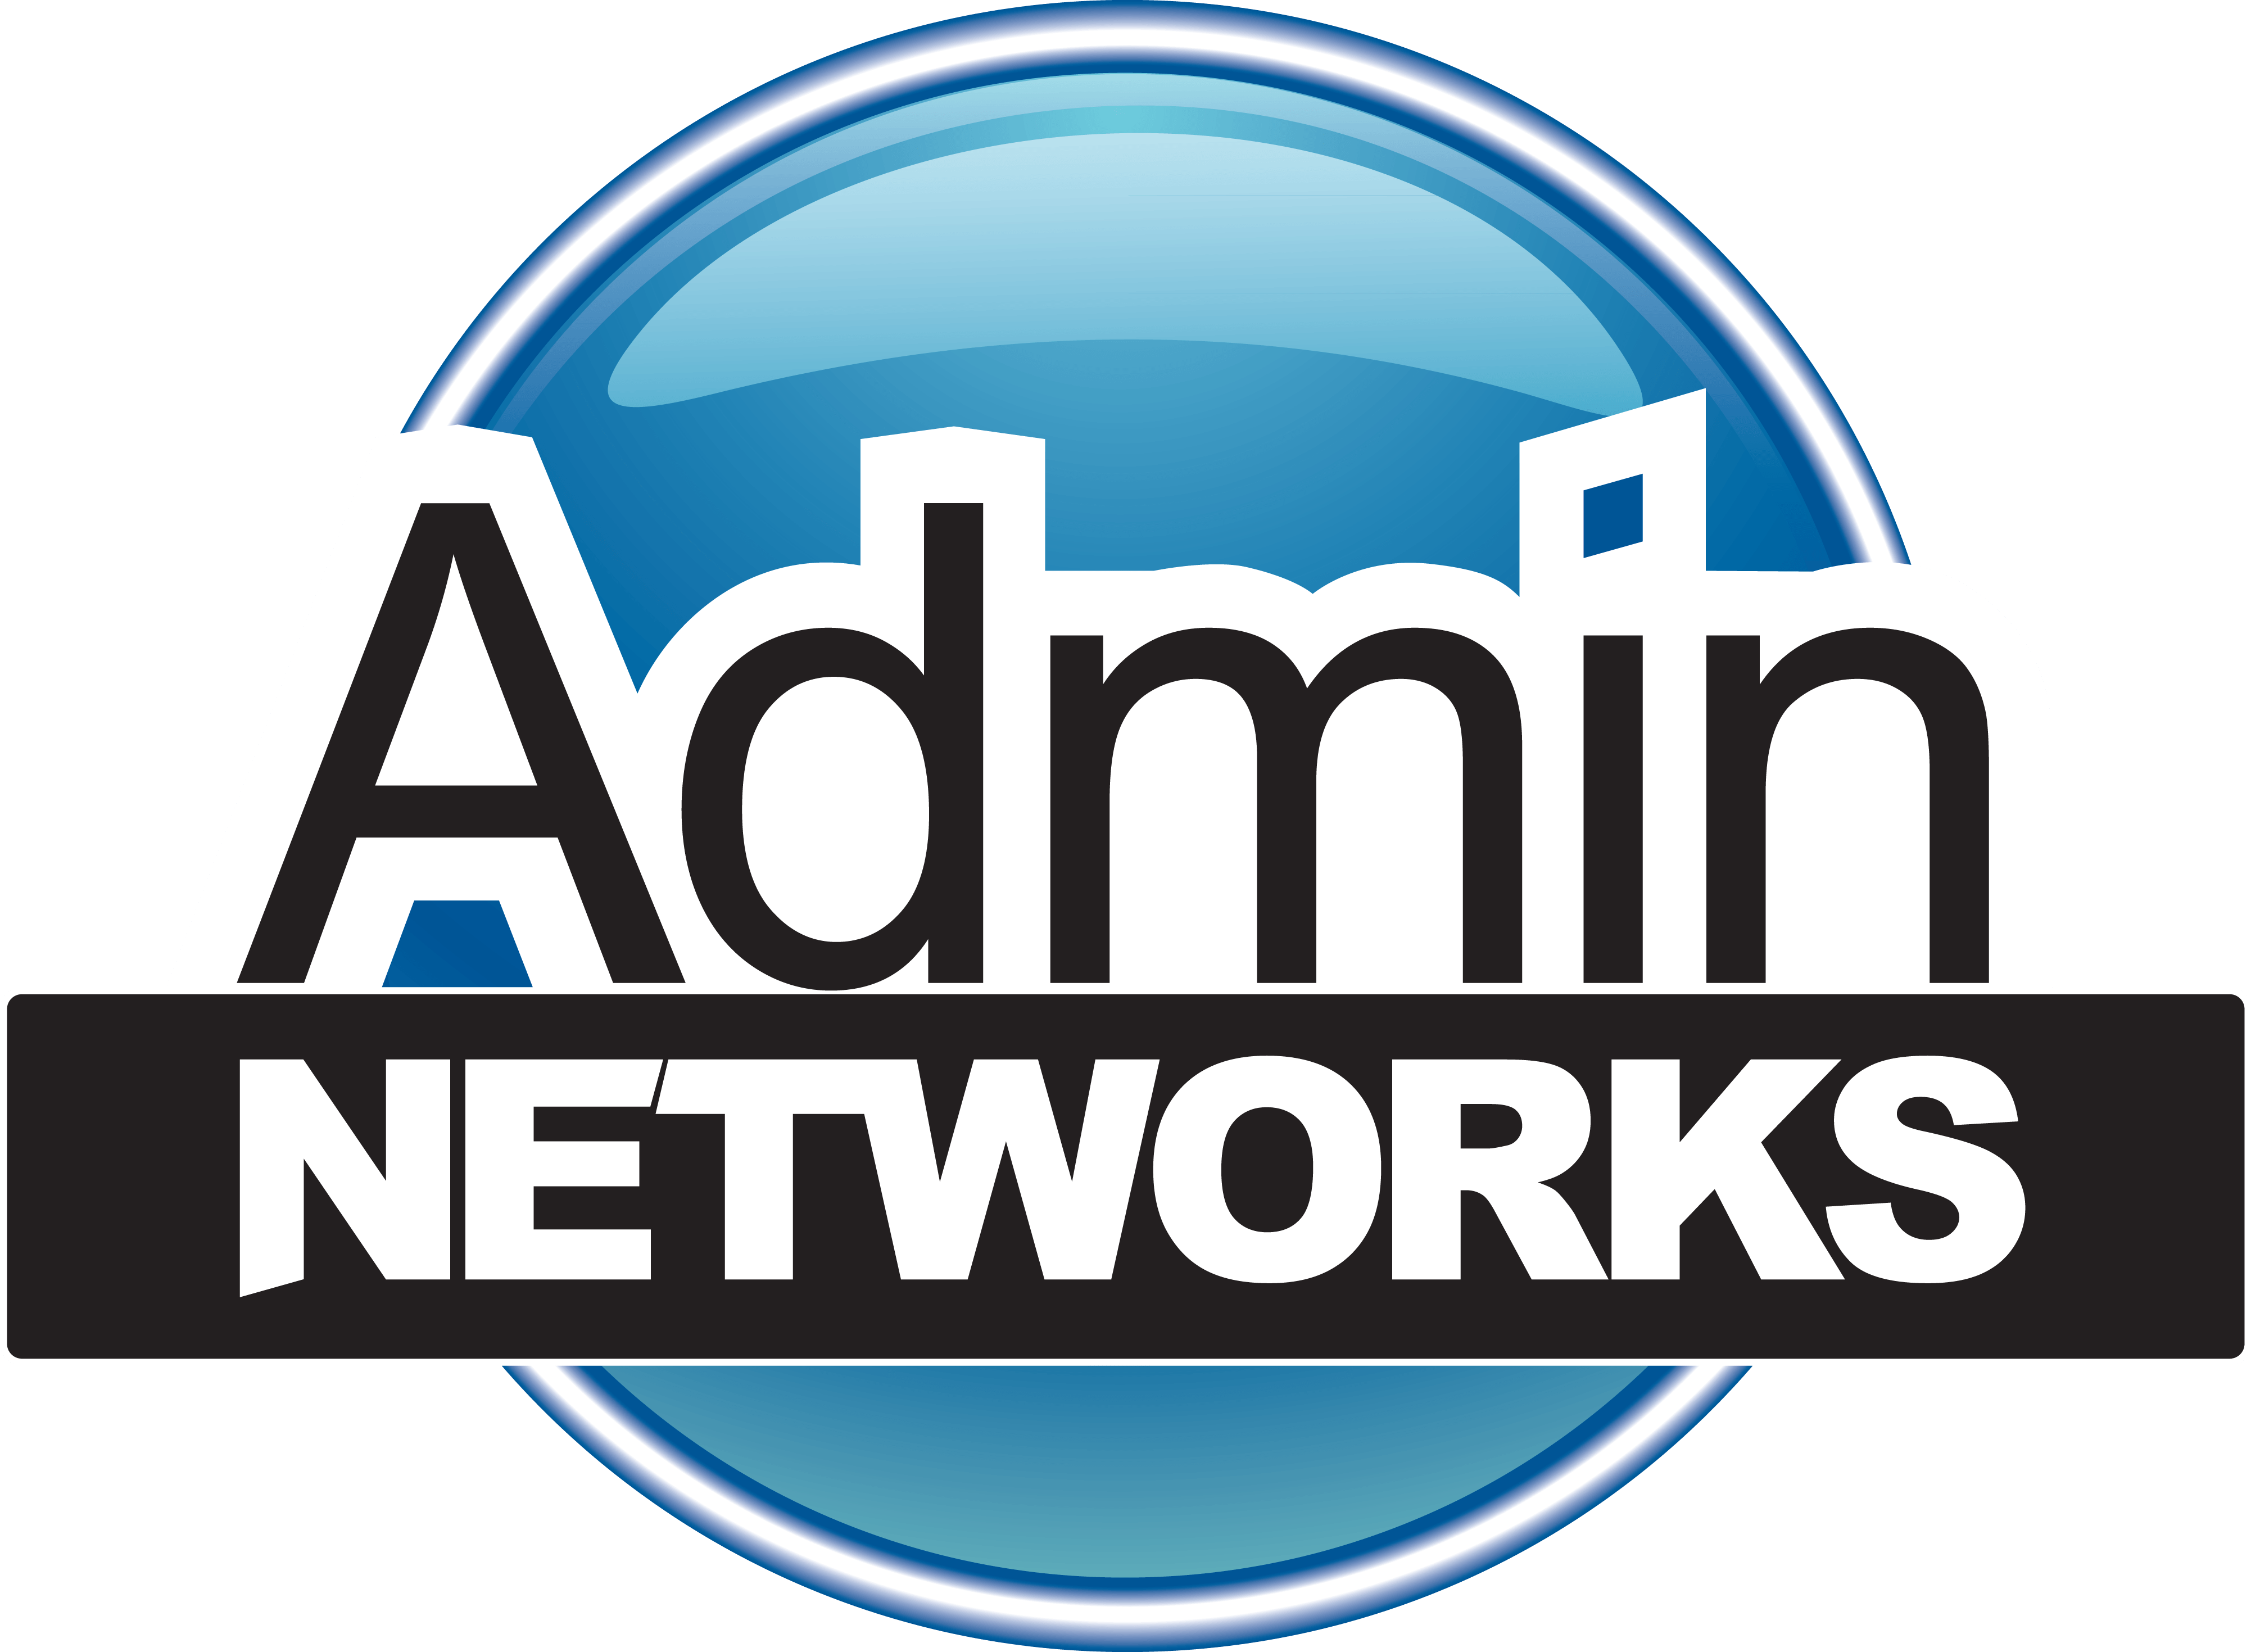 Admin Logo - Admin Networks: Computer Repair, Network Solutions, Data and Voice ...